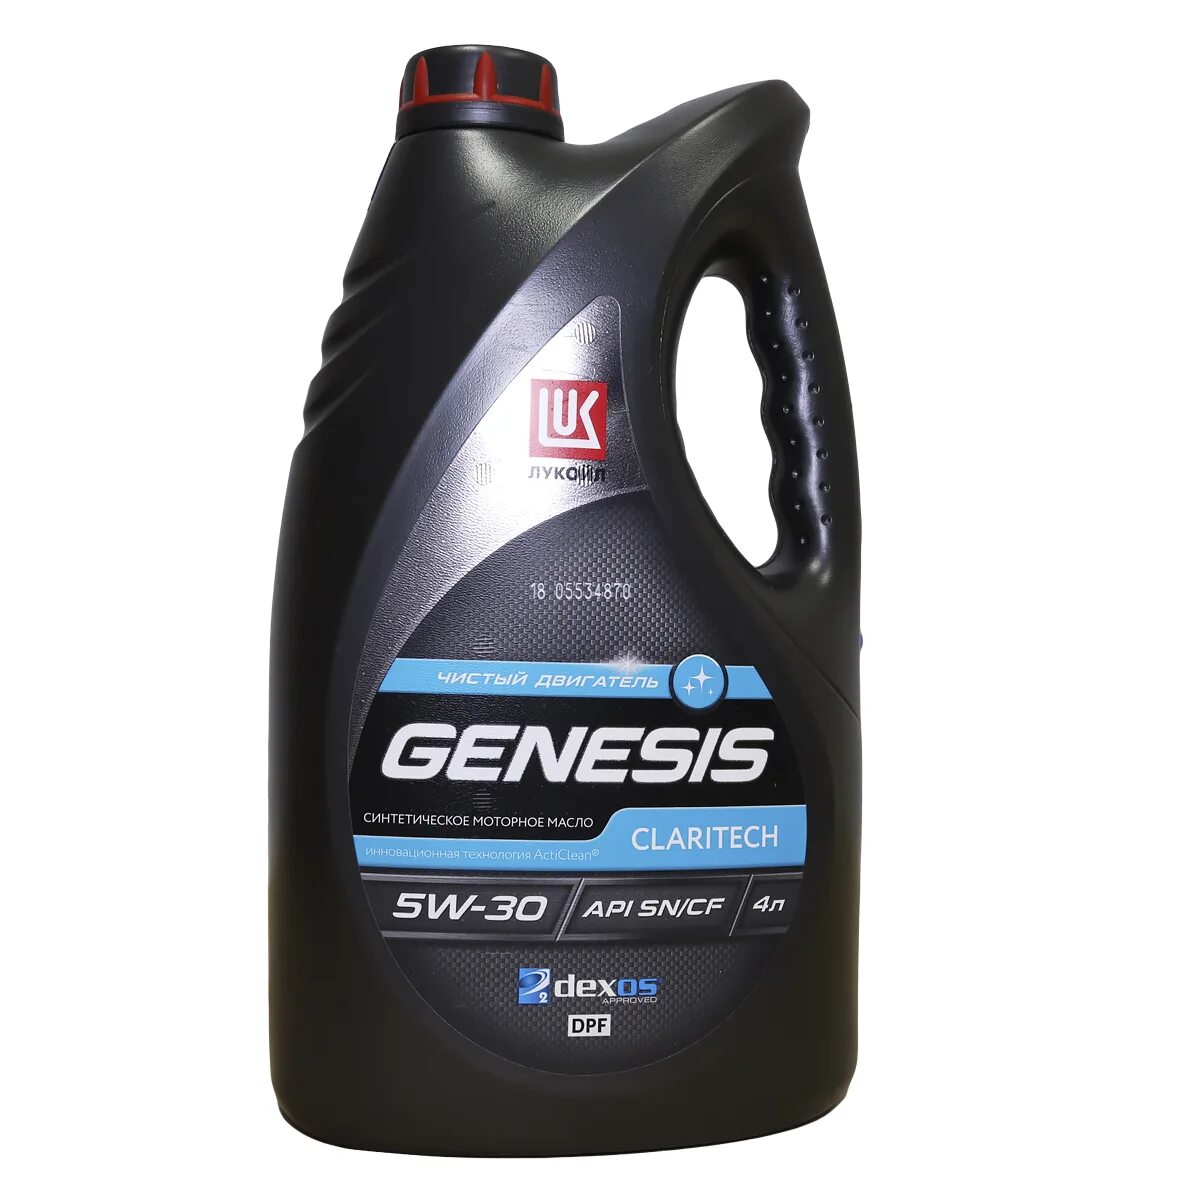 Масло лукойл dx1. Lukoil Genesis 5w30. Lukoil Genesis Claritech 5w-30. Genesis Armortech 5w-30. Lukoil Genesis 5w30 Genesis.